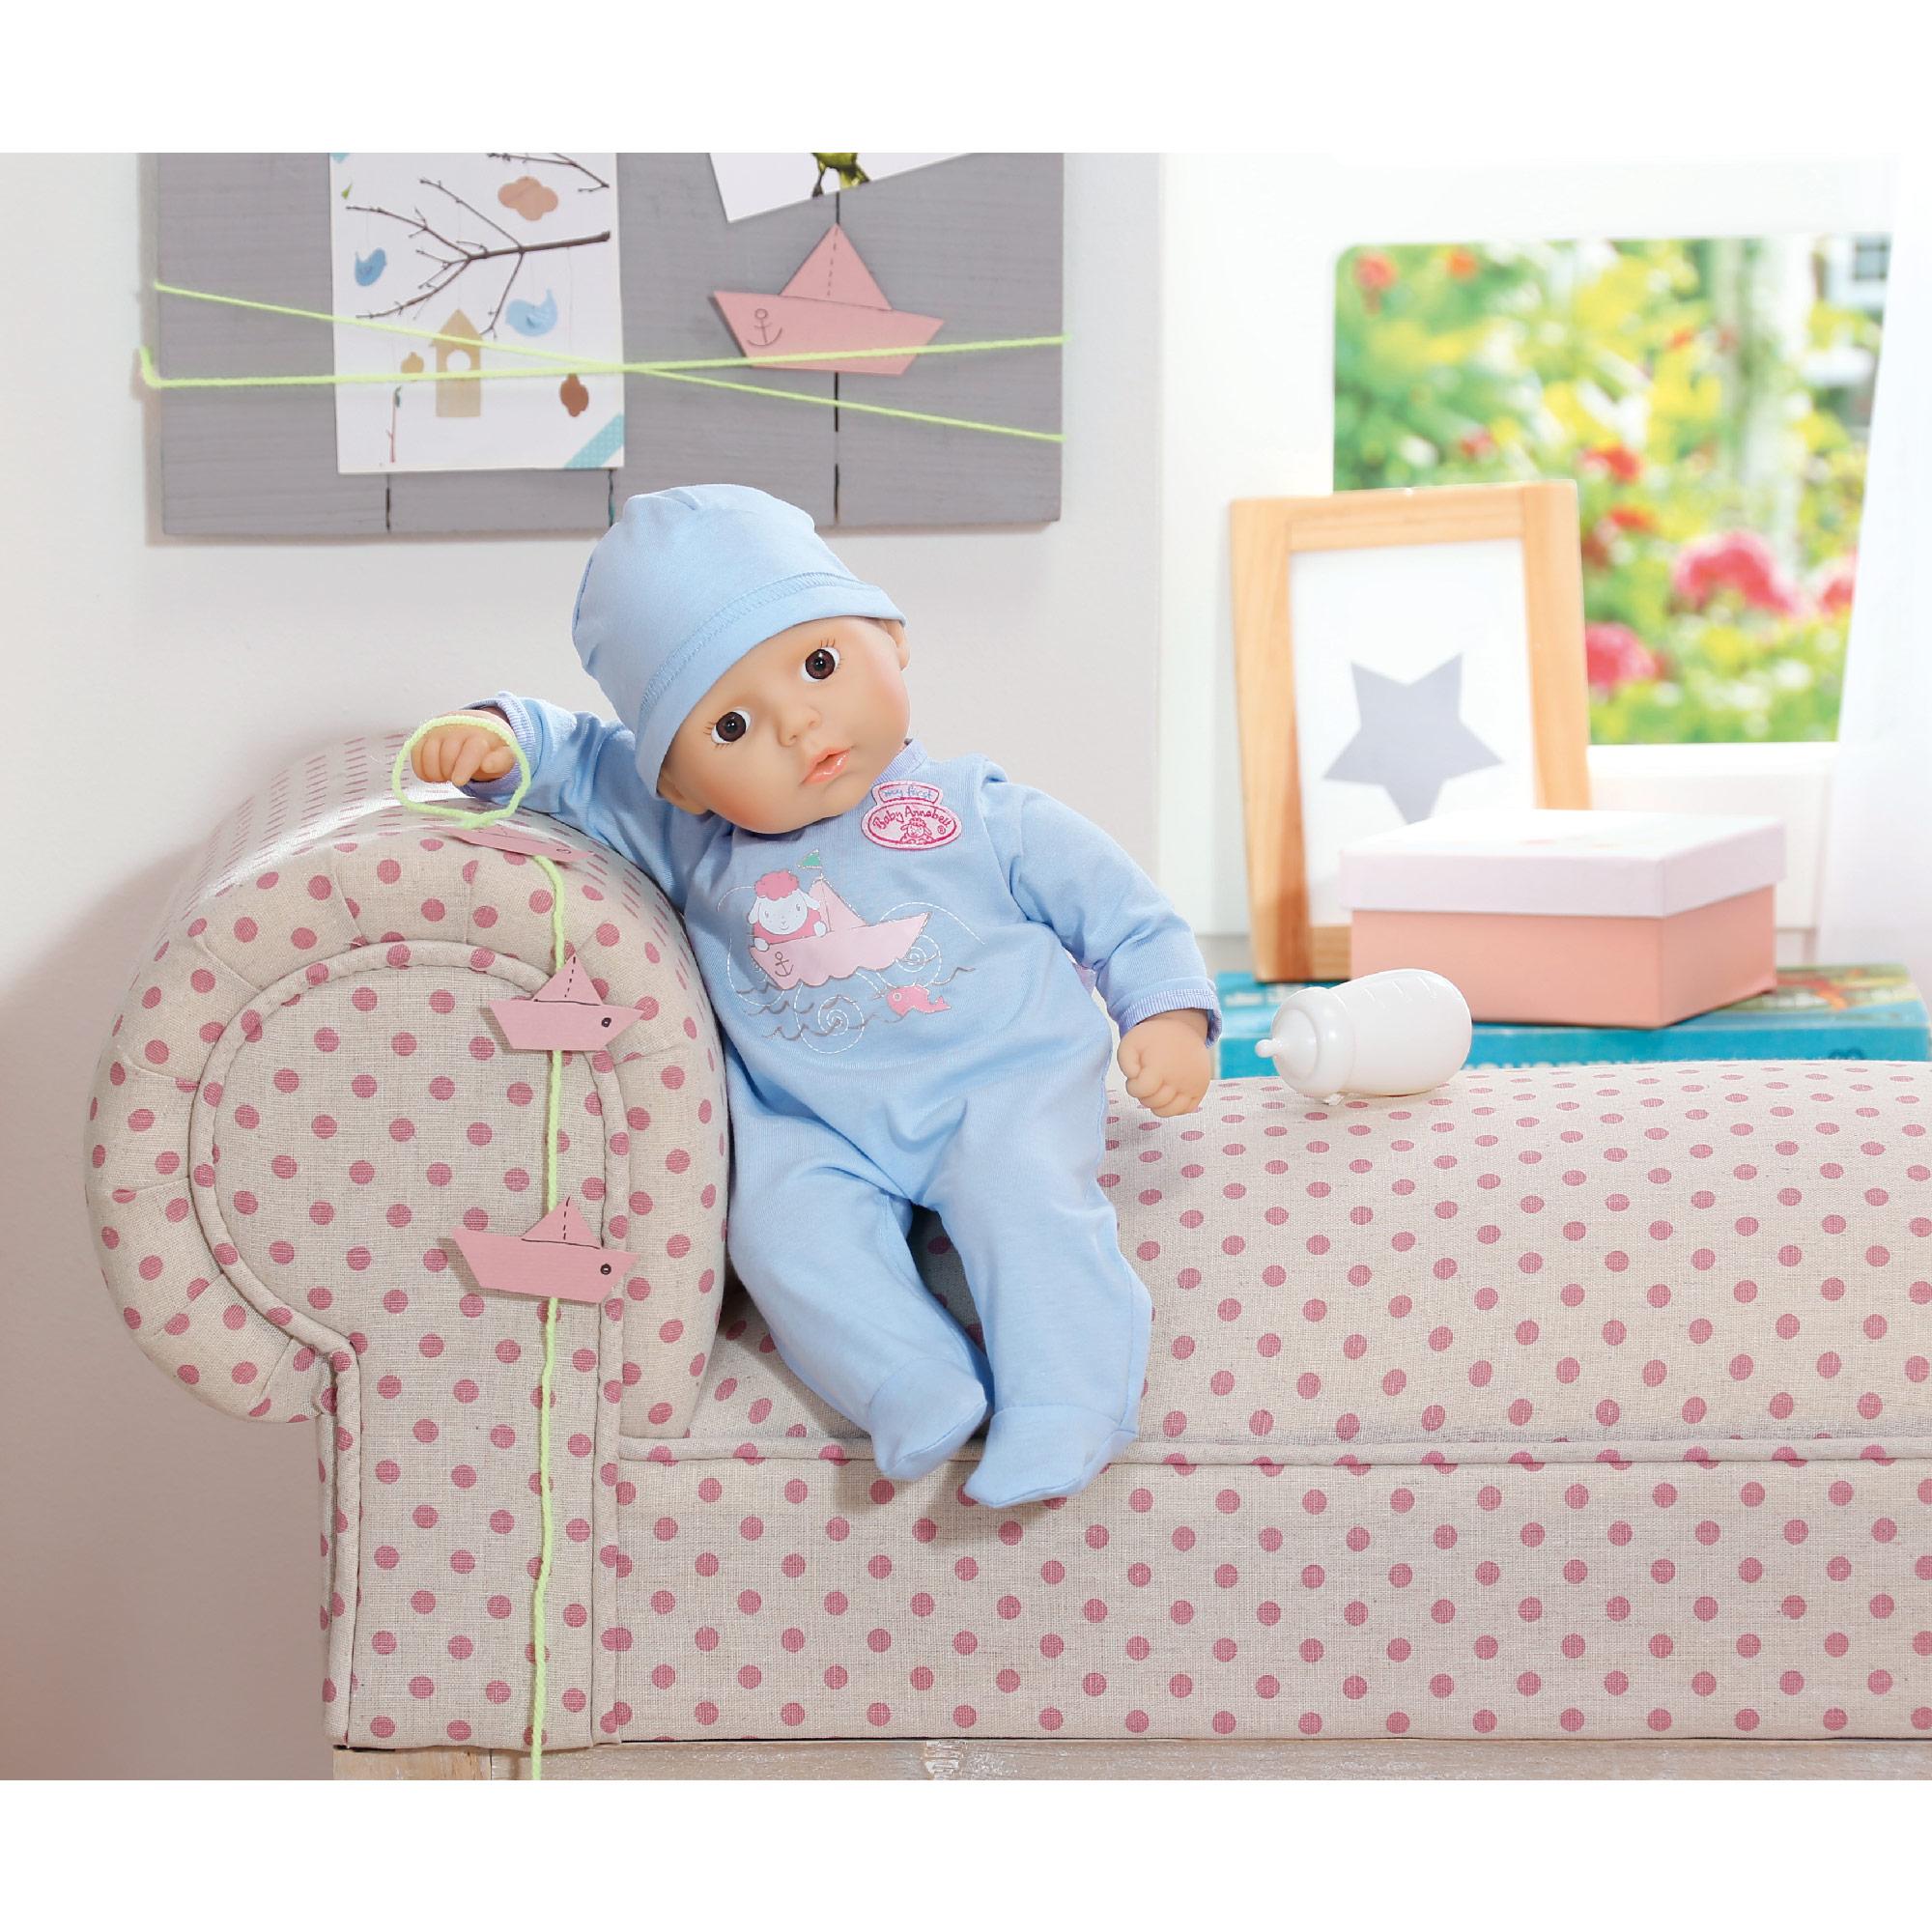 Review | Baby Annabell Little Brother doll